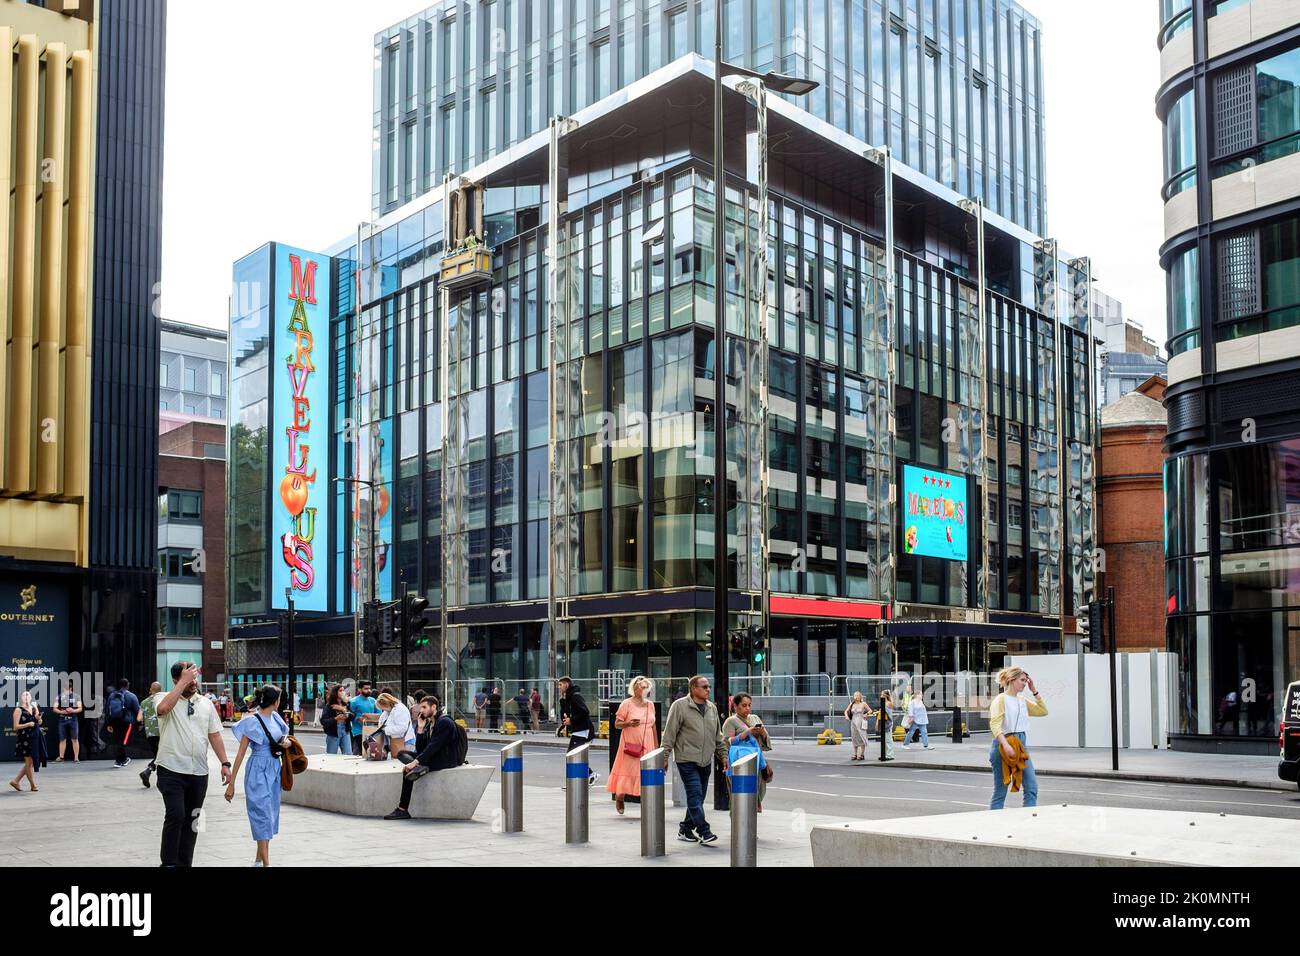 @sohoplace theatre, part of the new Soho Place development project on Charing Cross Road and Oxford Street, London, UK. Stock Photo